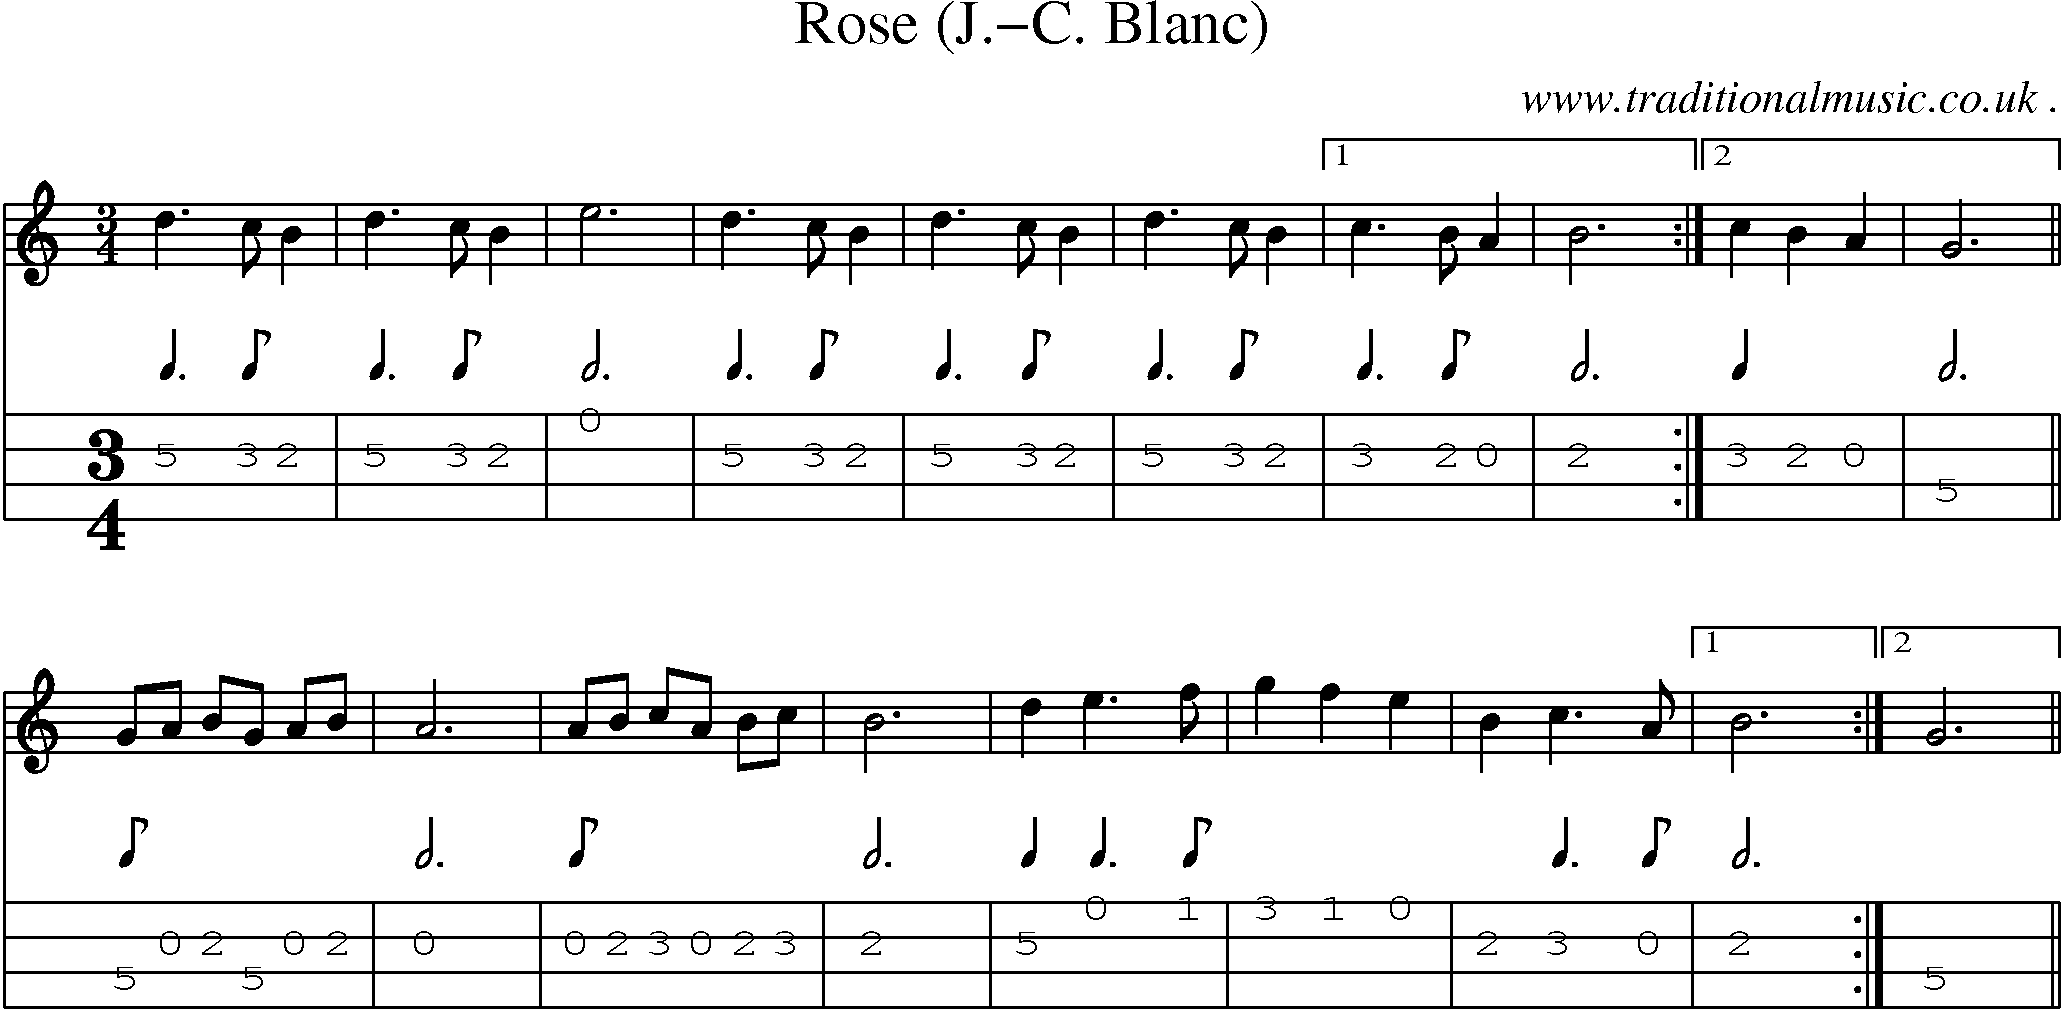 Sheet-Music and Mandolin Tabs for Rose (j-c Blanc)